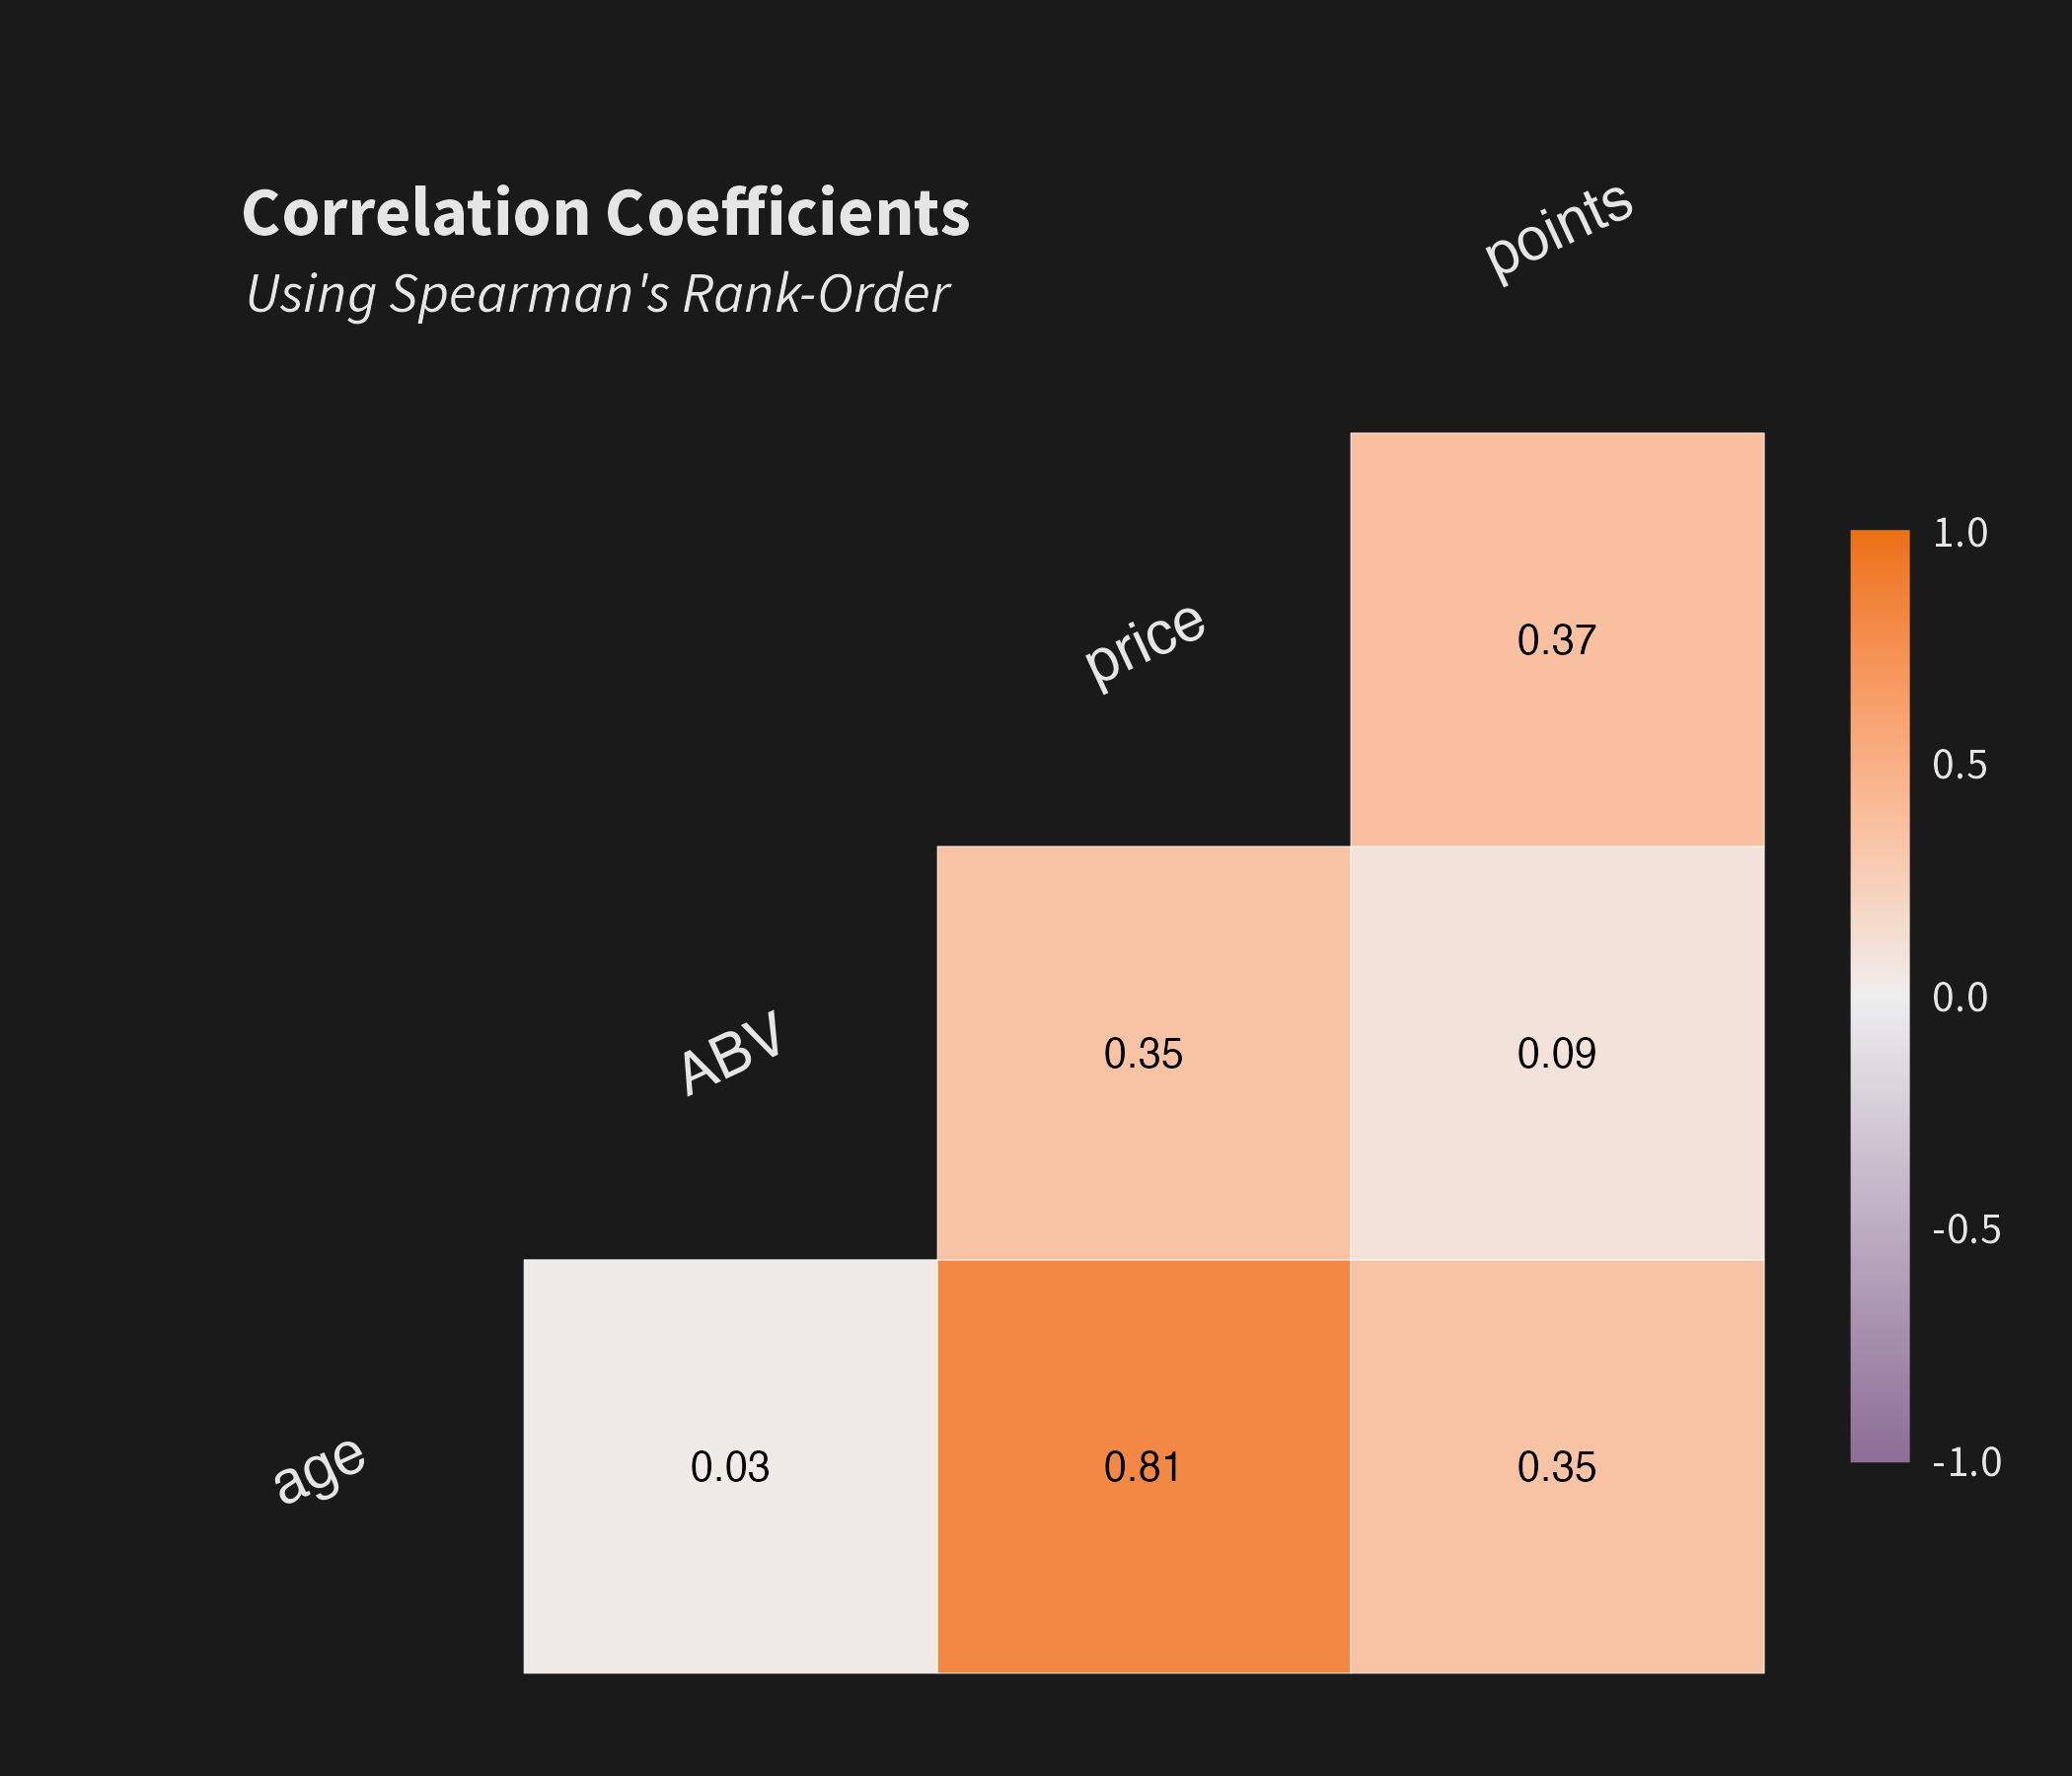 Correlation plot for age, ABV, price, and points.